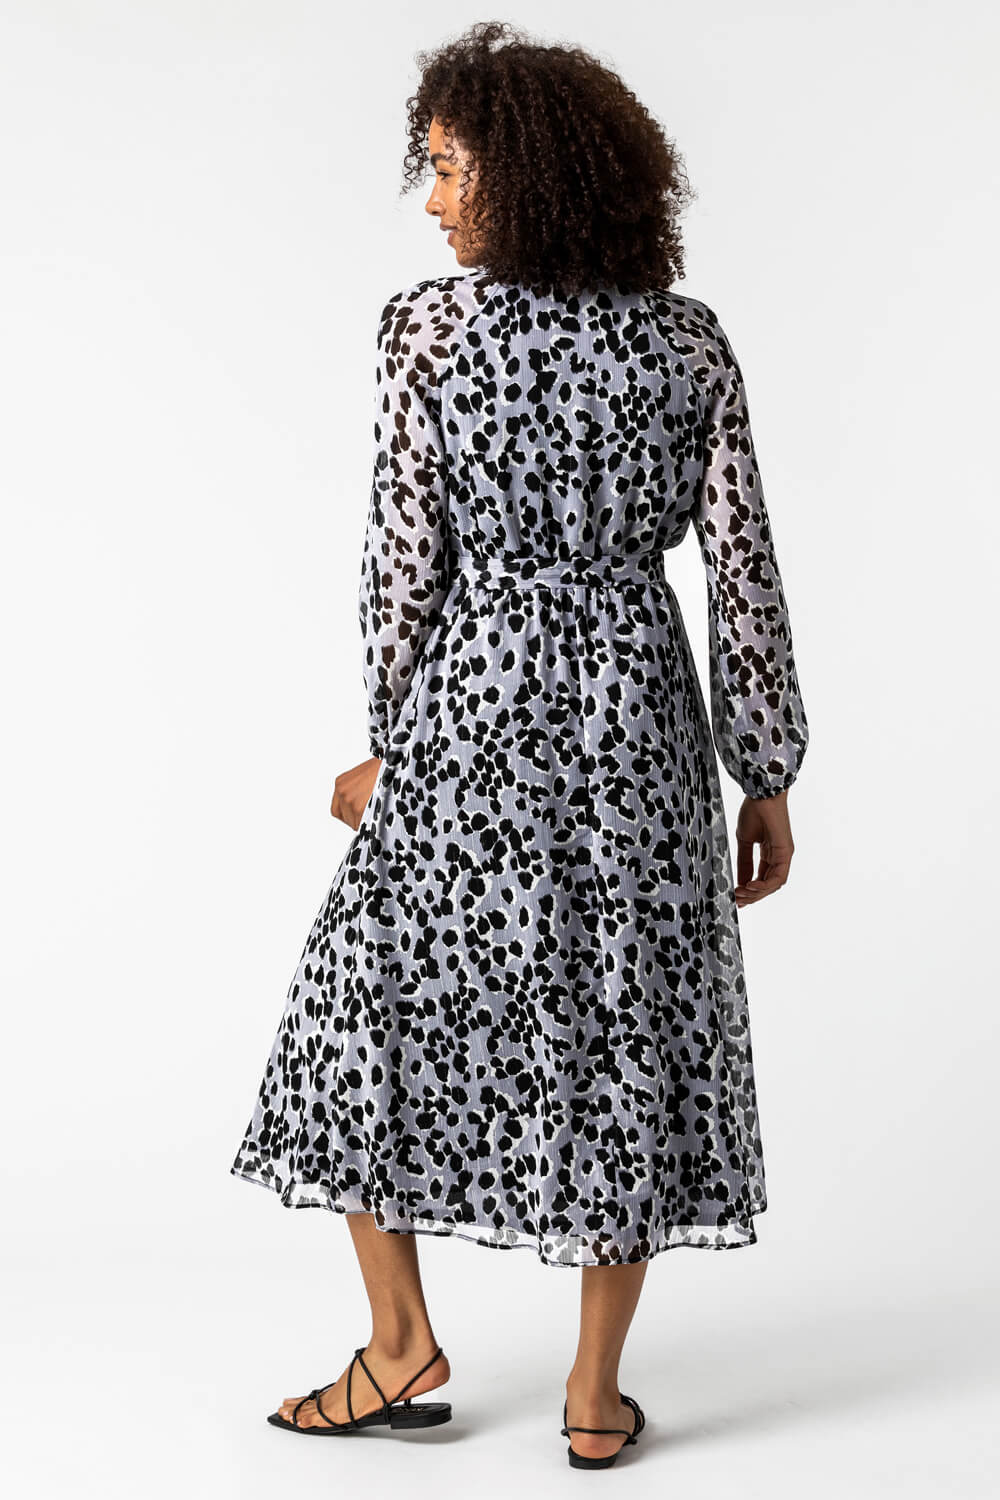 Silver Animal Print Belted Midi Dress, Image 2 of 5